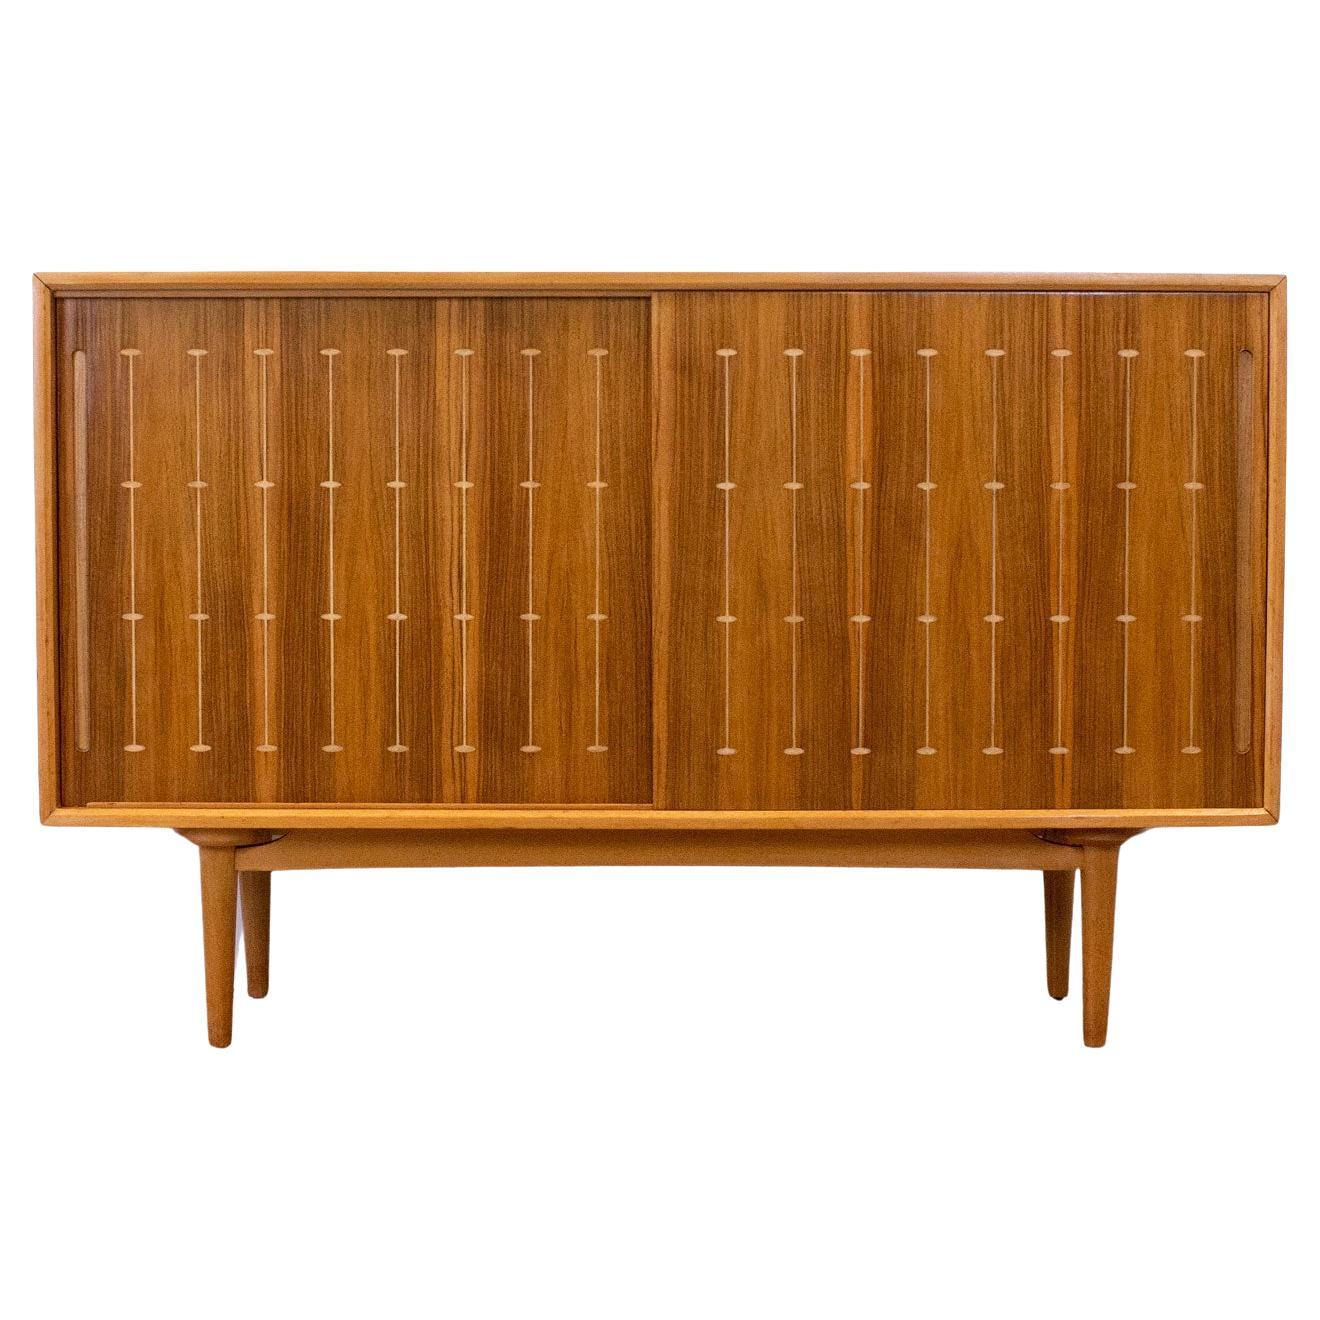 Mid Century Walnut Sideboard with Routed Pattern by Heals, 1950s